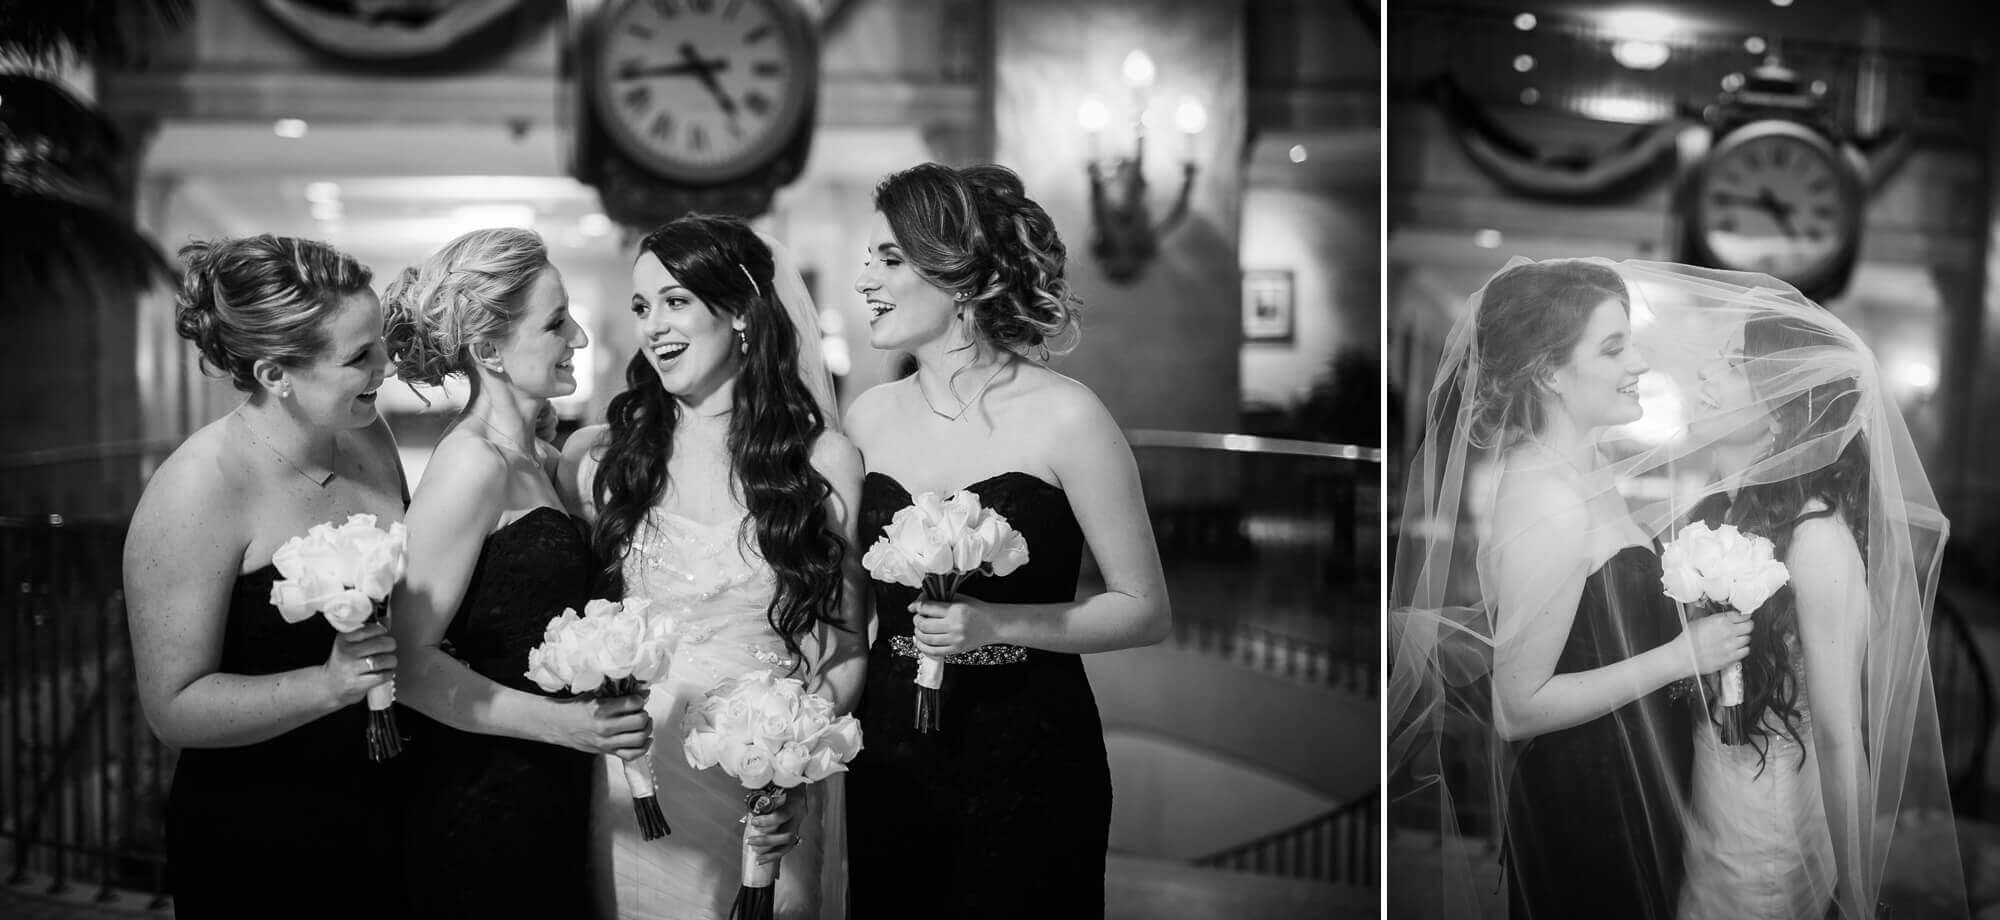 Black and white portrait of the bride and her bridal party at the Fairmont Royal York in Toronto